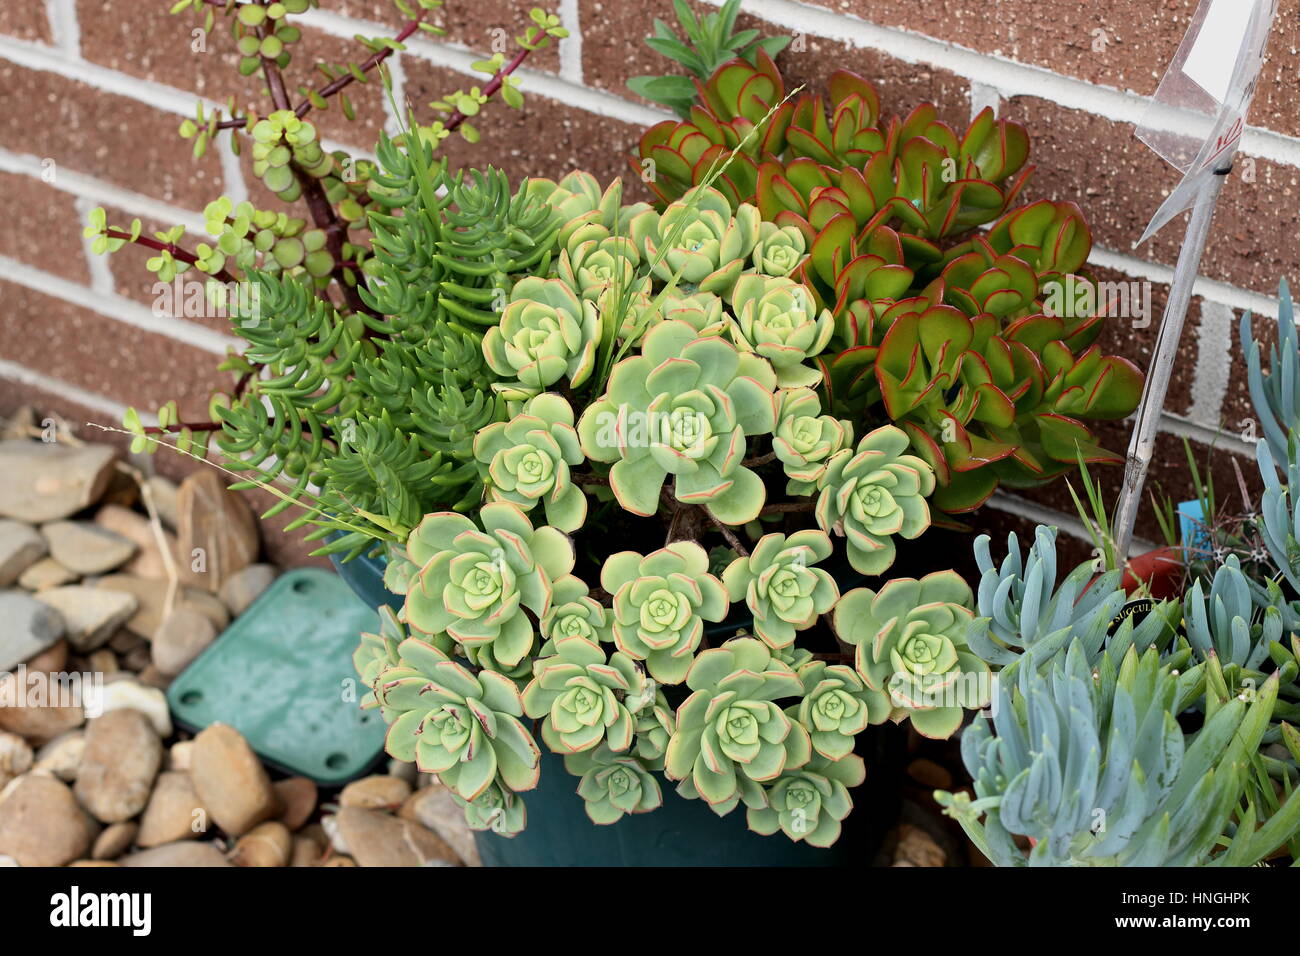 Mixed succulents such as  Aeonium haworthii, Jade pna,t Money plant growing in a pot against brick wall Stock Photo